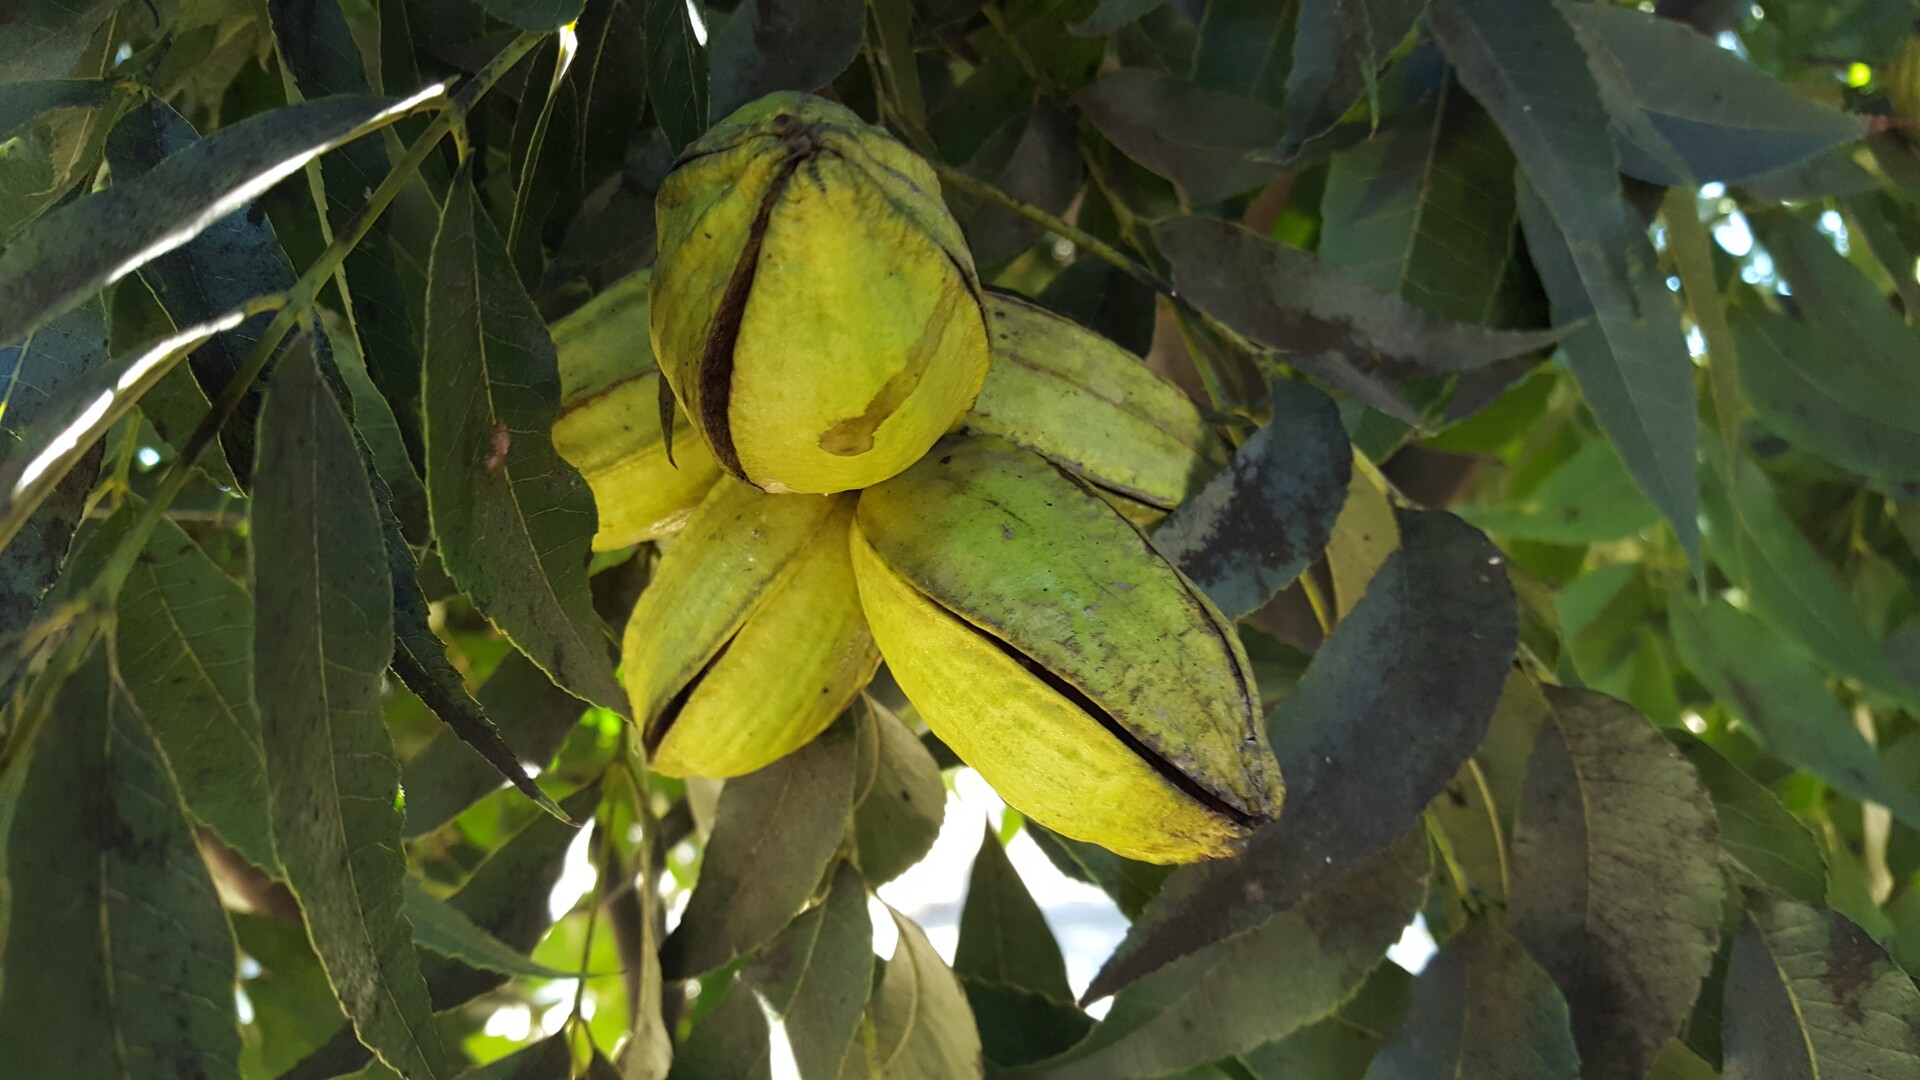 Pecan Genetics for Research Are Critical for Industry